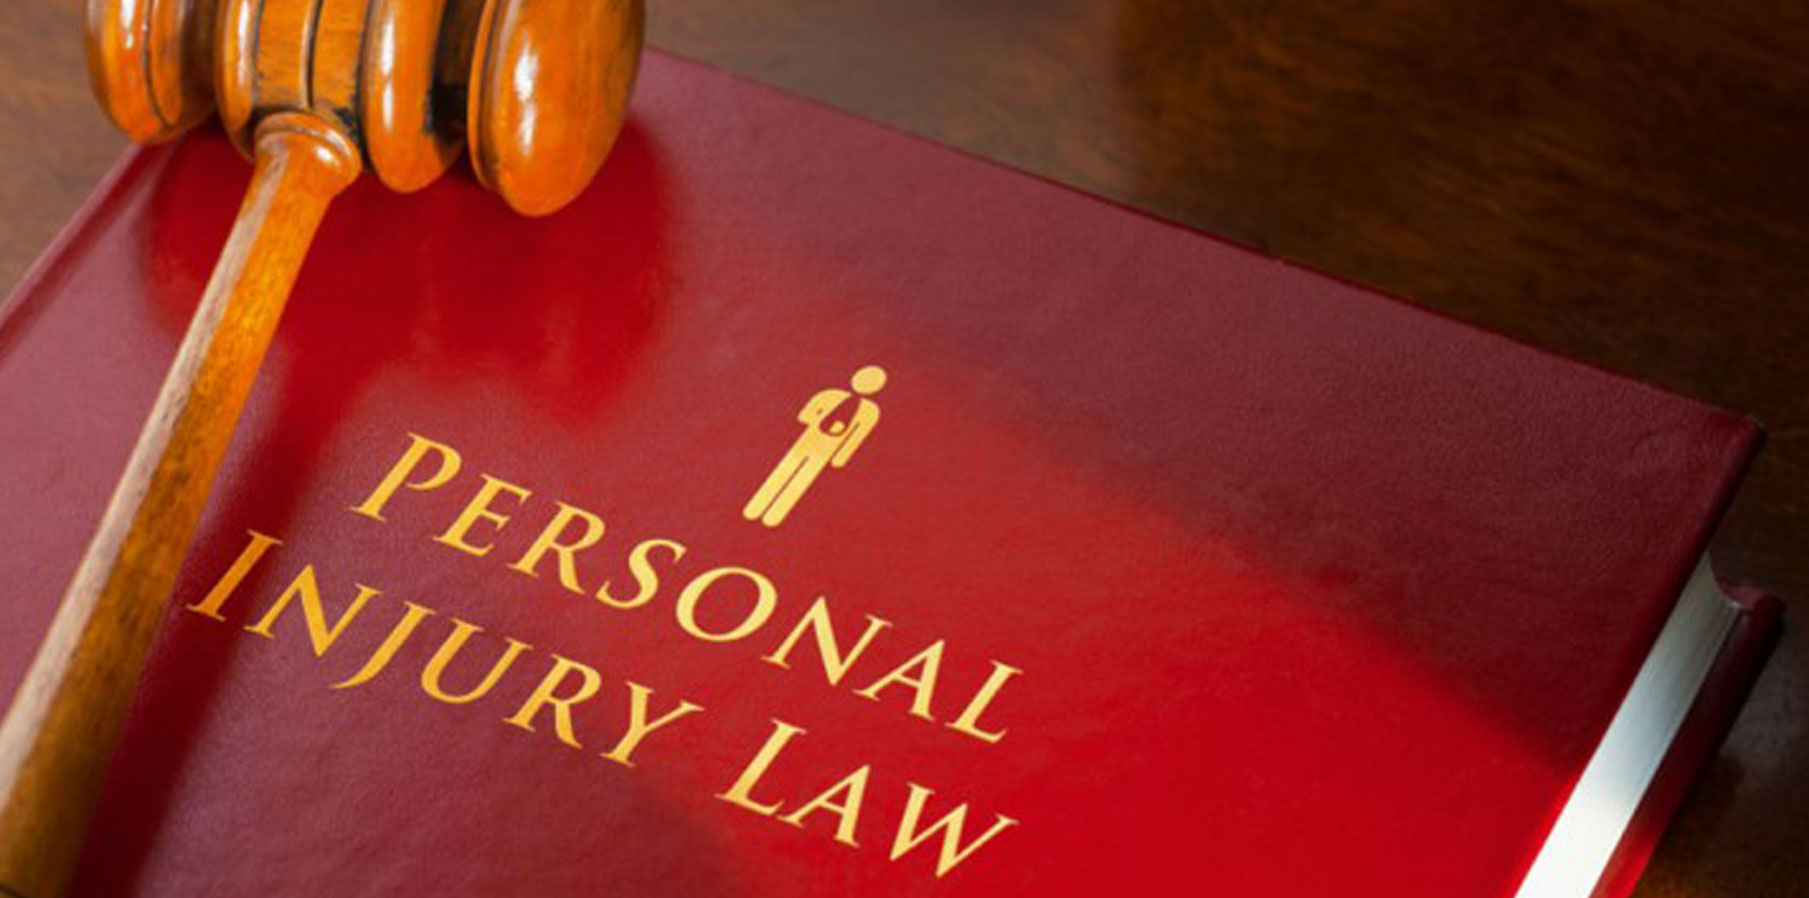 Personal injury lawyer Near You& Claims